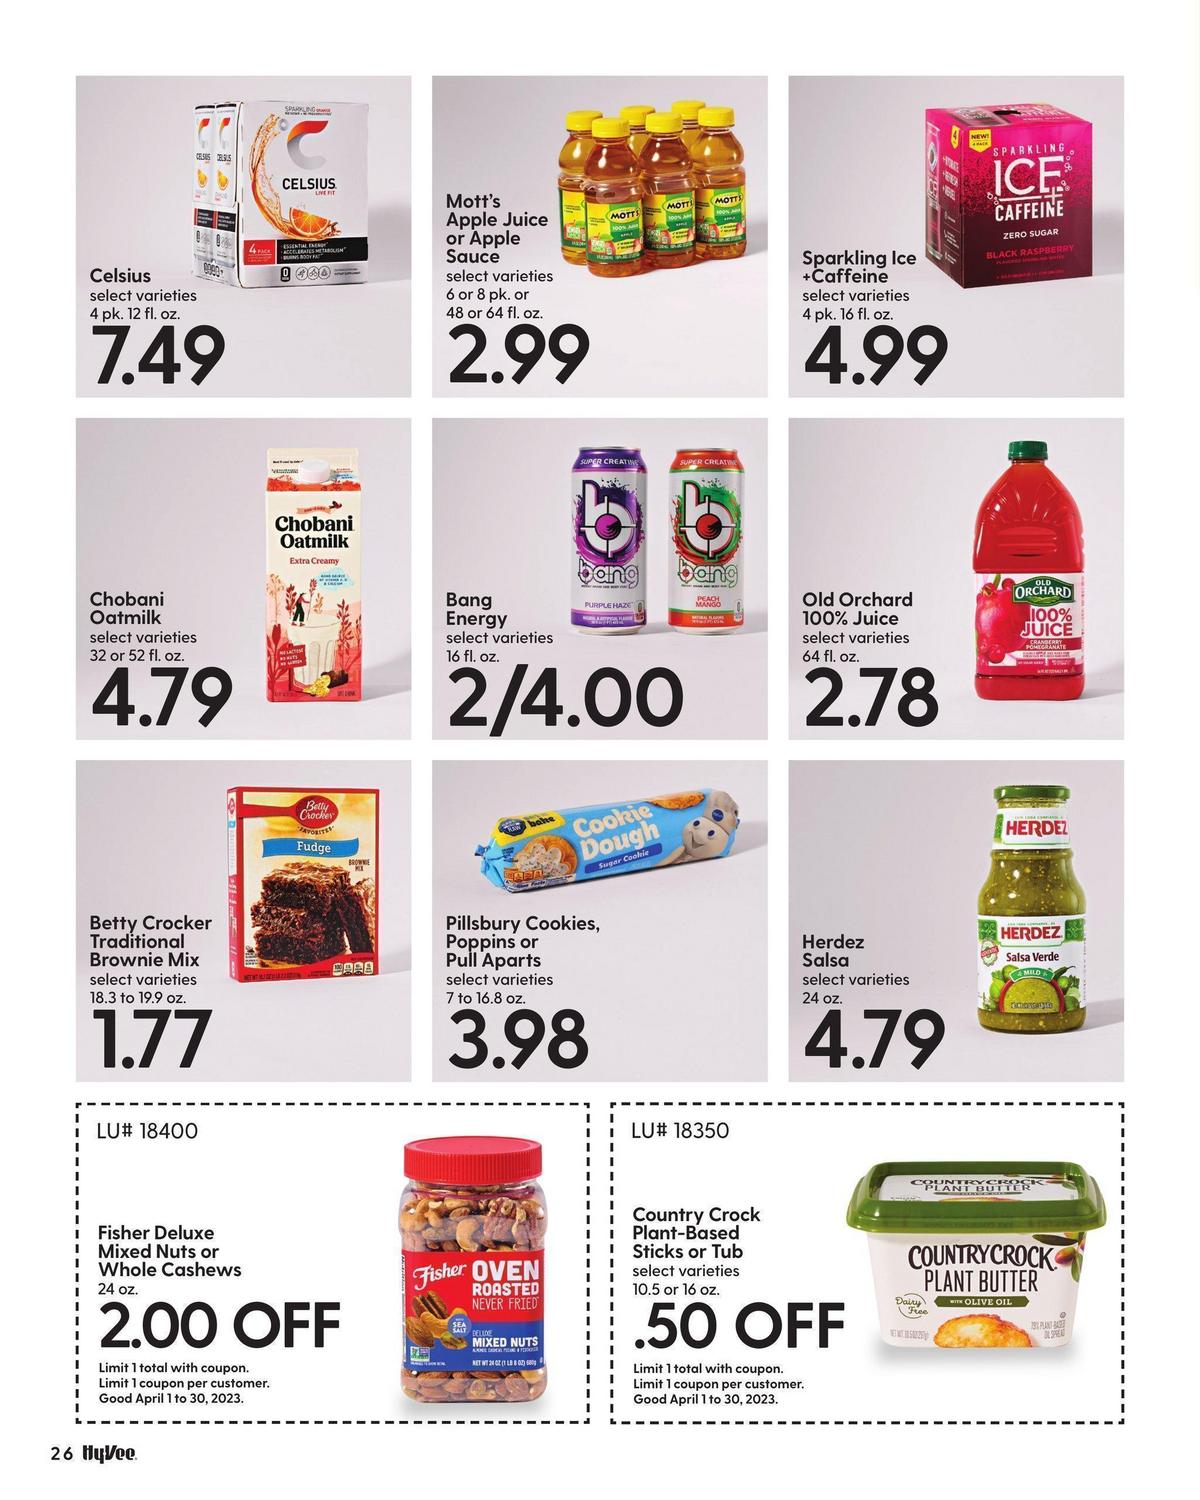 Hy-Vee Race in For Deals Weekly Ad from April 1